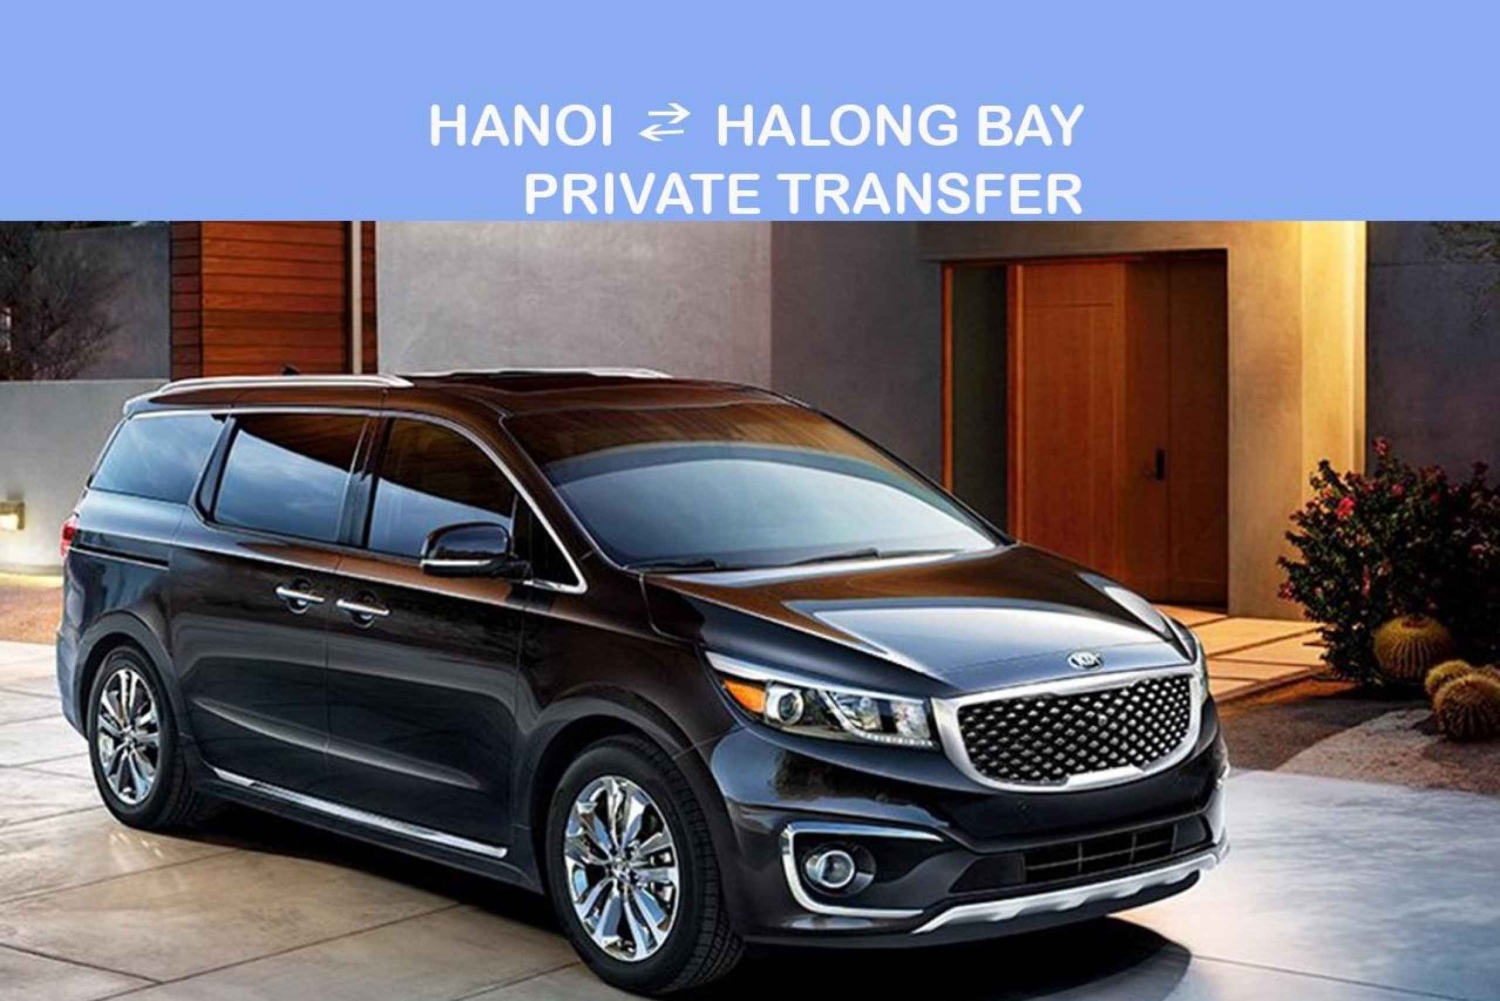 Hanoi: Private Car Transfer to or from Halong Bay